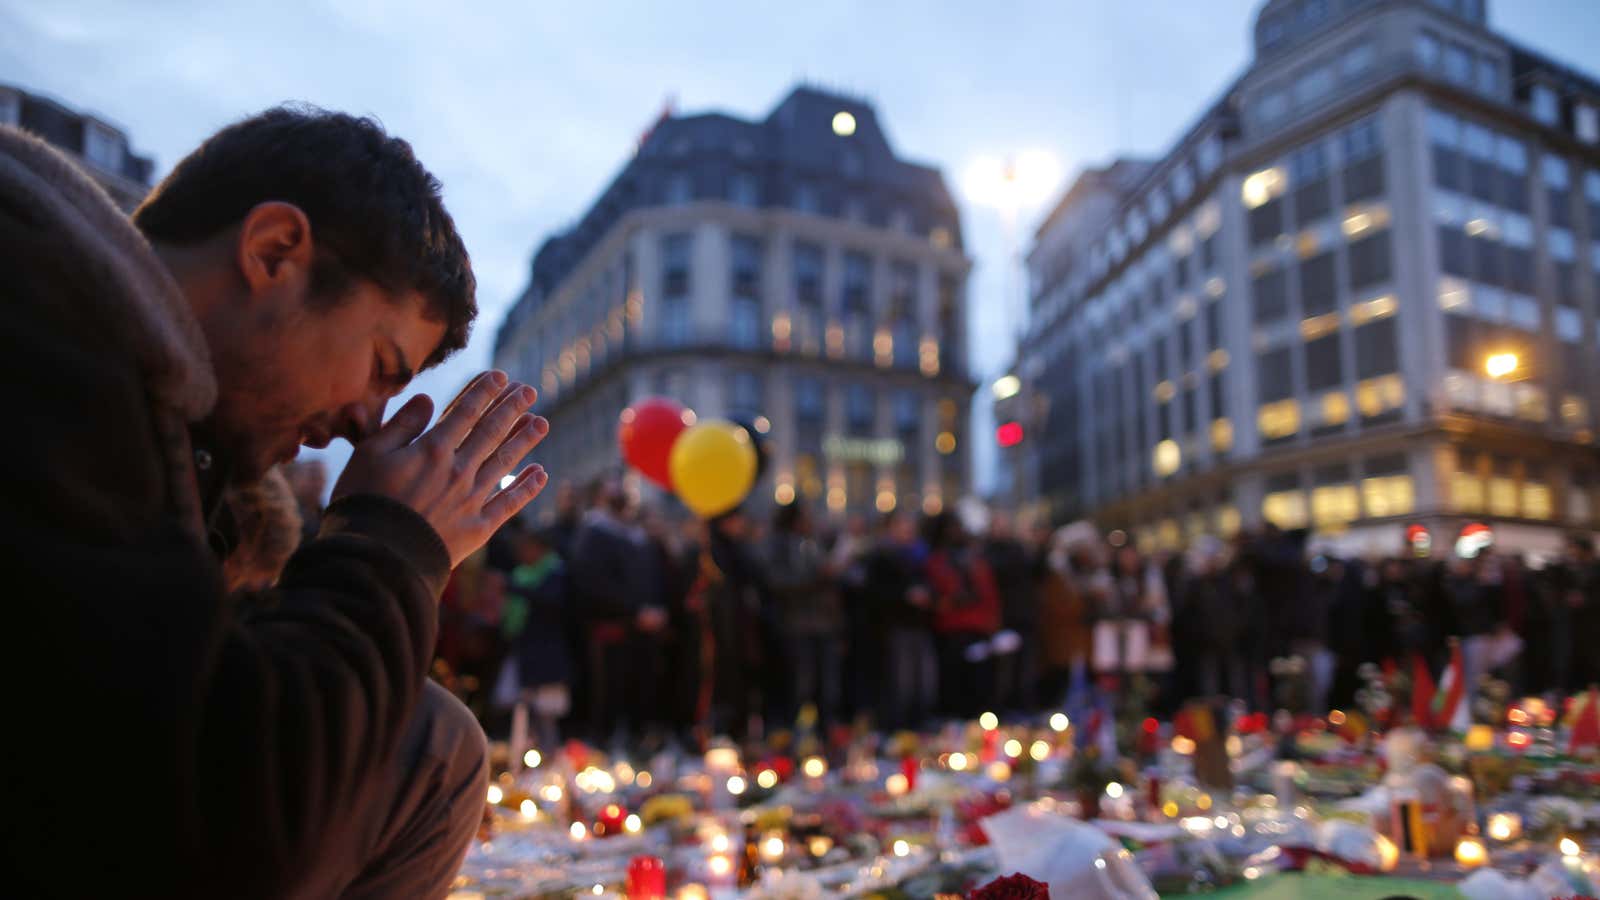 A man attends a memorial gathering near the old stock exchange in Brussels following Tuesday’s bomb attacks in Brussels.